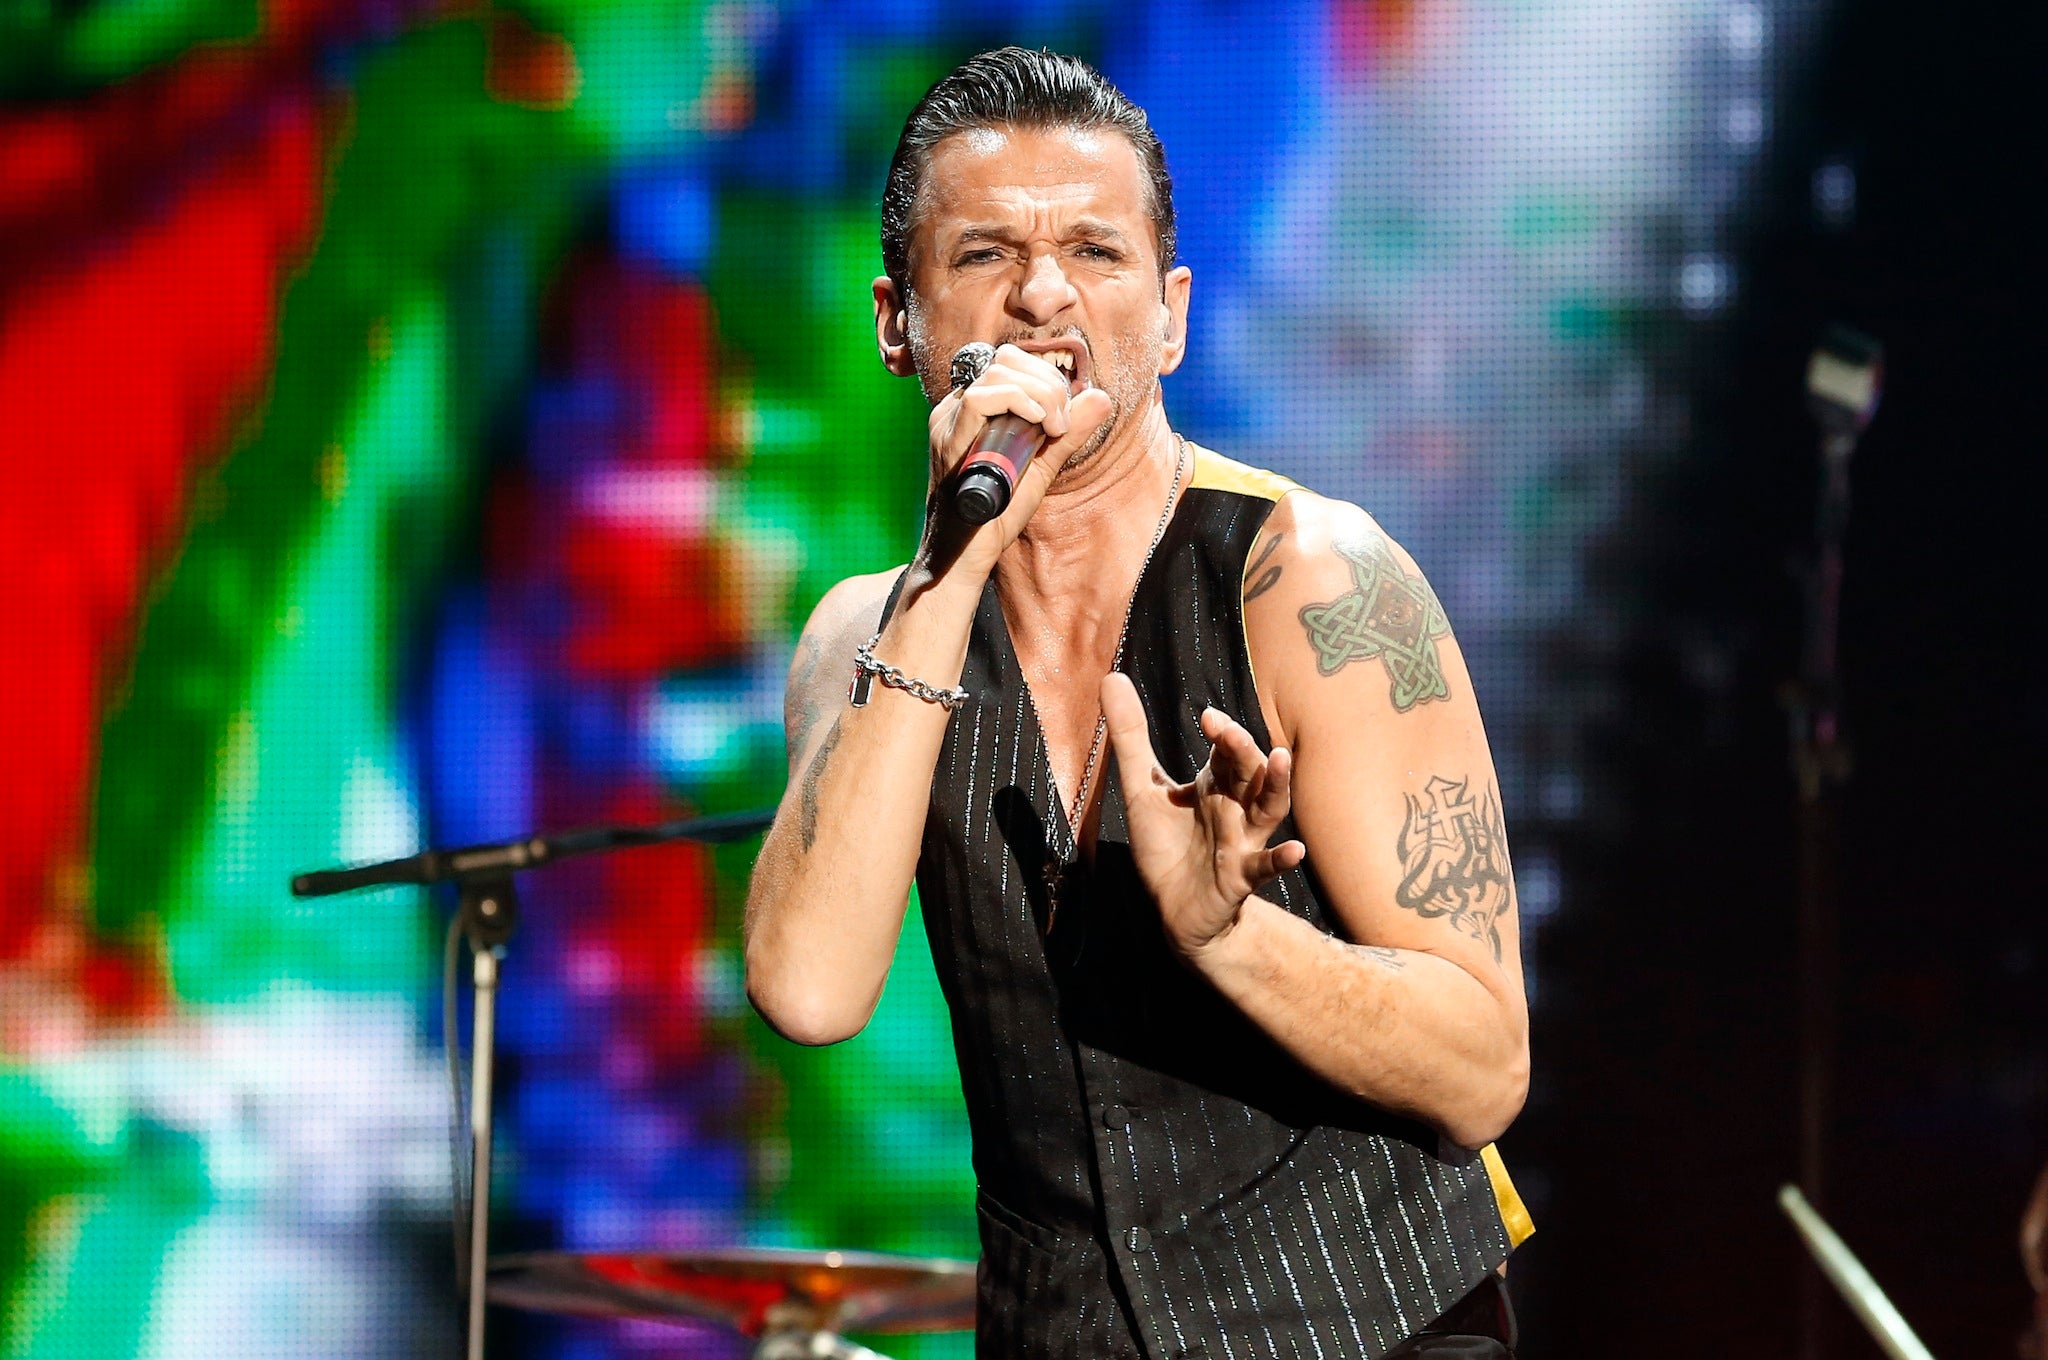 Lead singer of the British band 'Depeche Mode' Dave Gahan performs on stage during 'The delta machine tour'